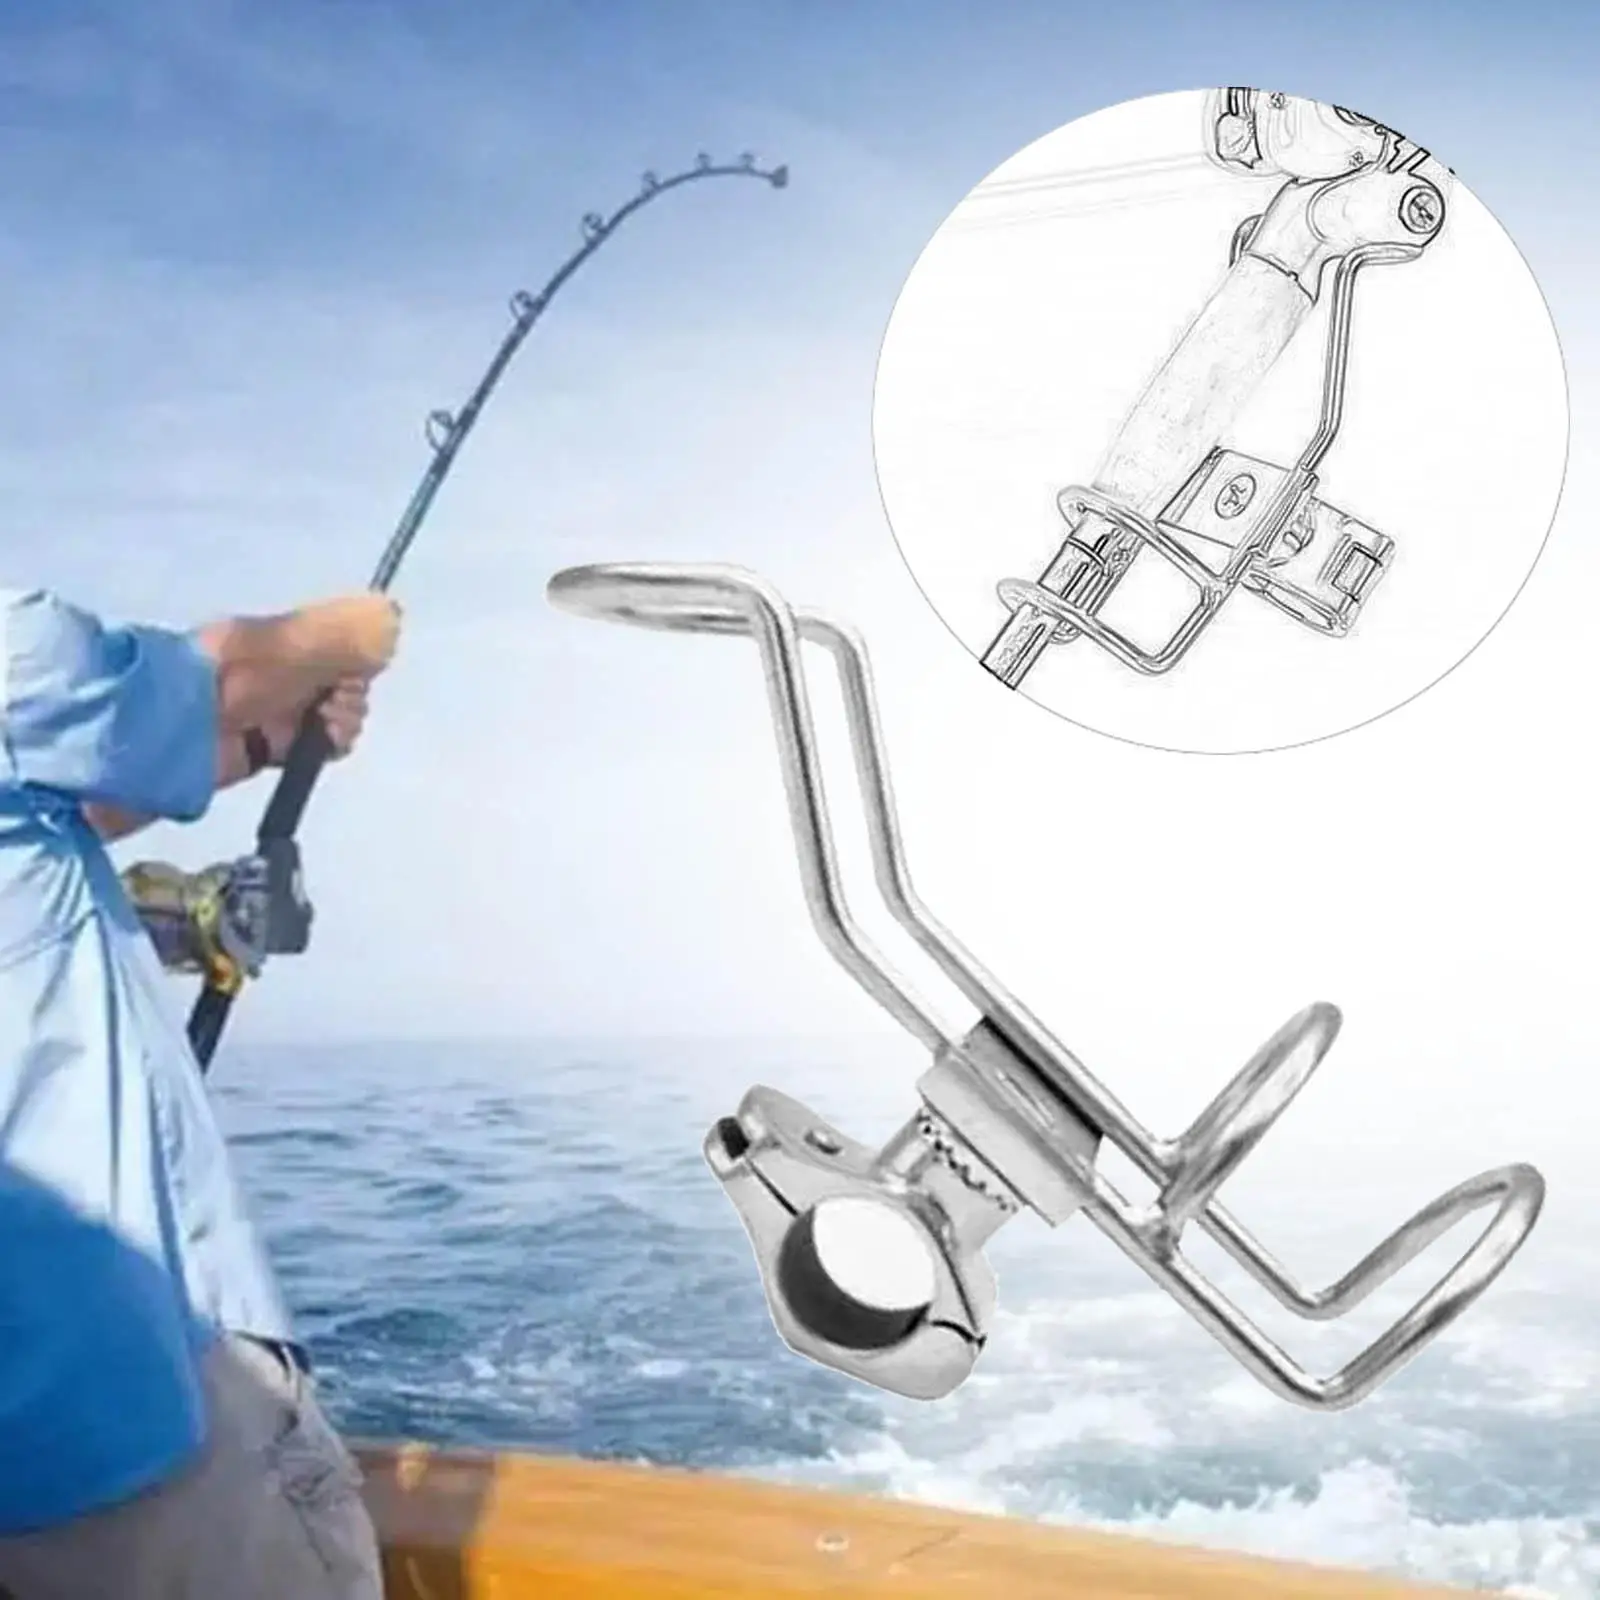 Fishing Rod Holders Easy Install Stainless Steel Support Fishing Pole Rack for